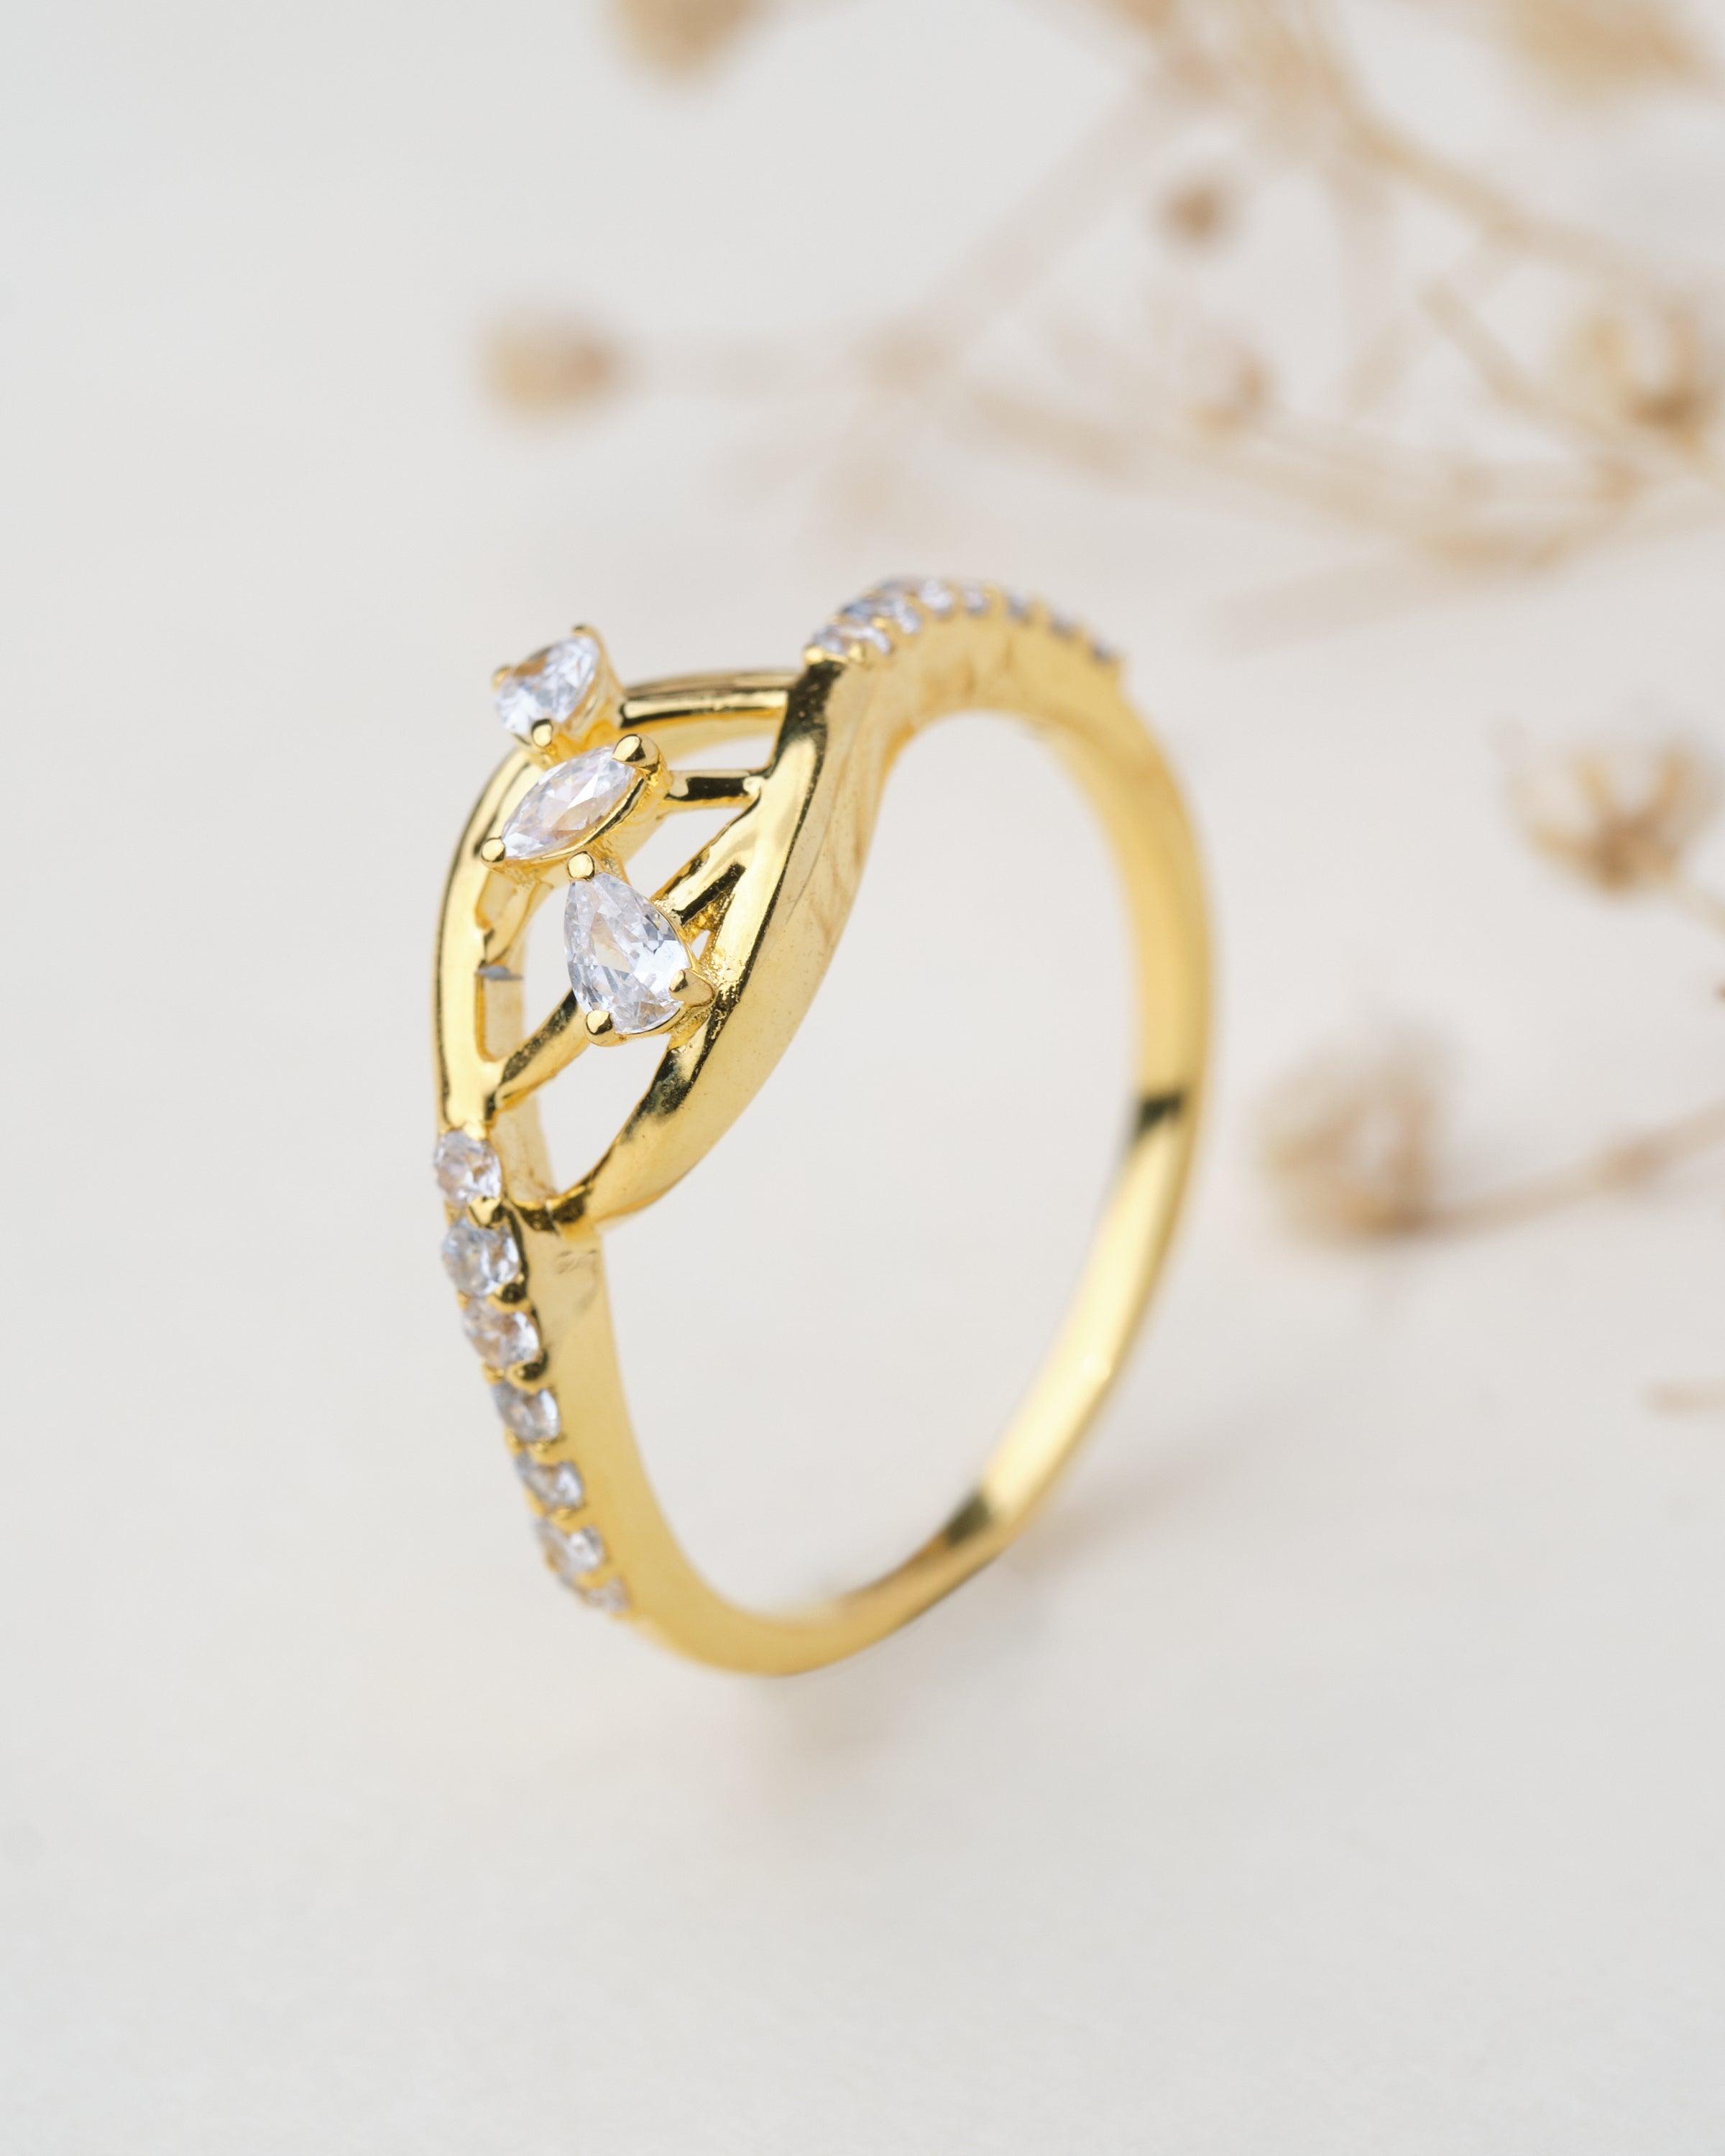 Delicate Engagement Ring For Women |